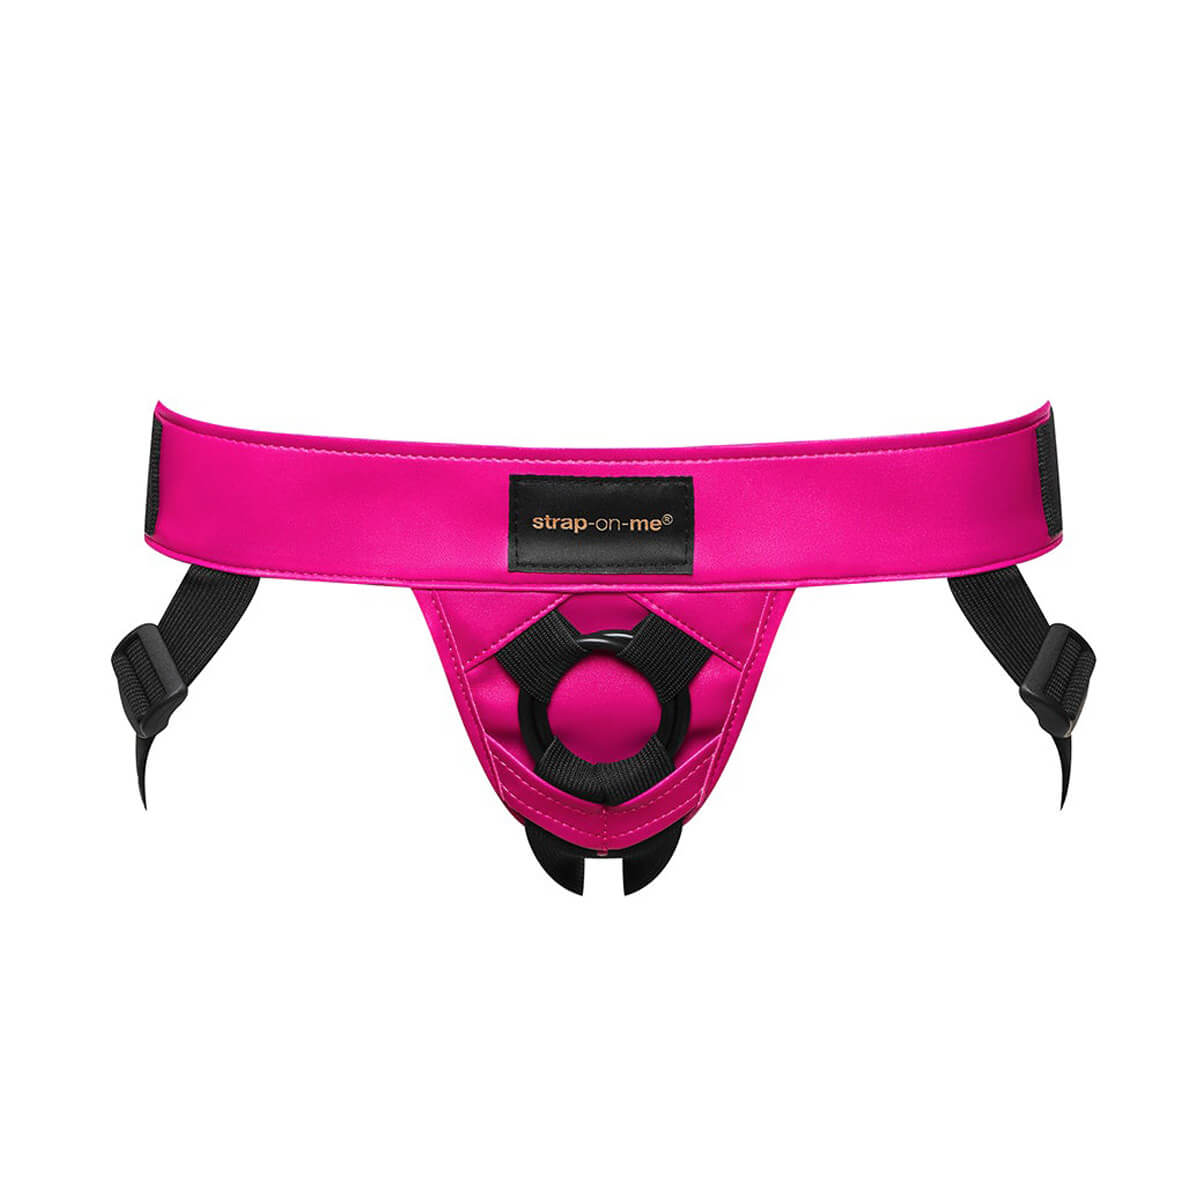 Fushia pink leatherette harness  with black straps and flexible ring to insert dildo  Nudie Co